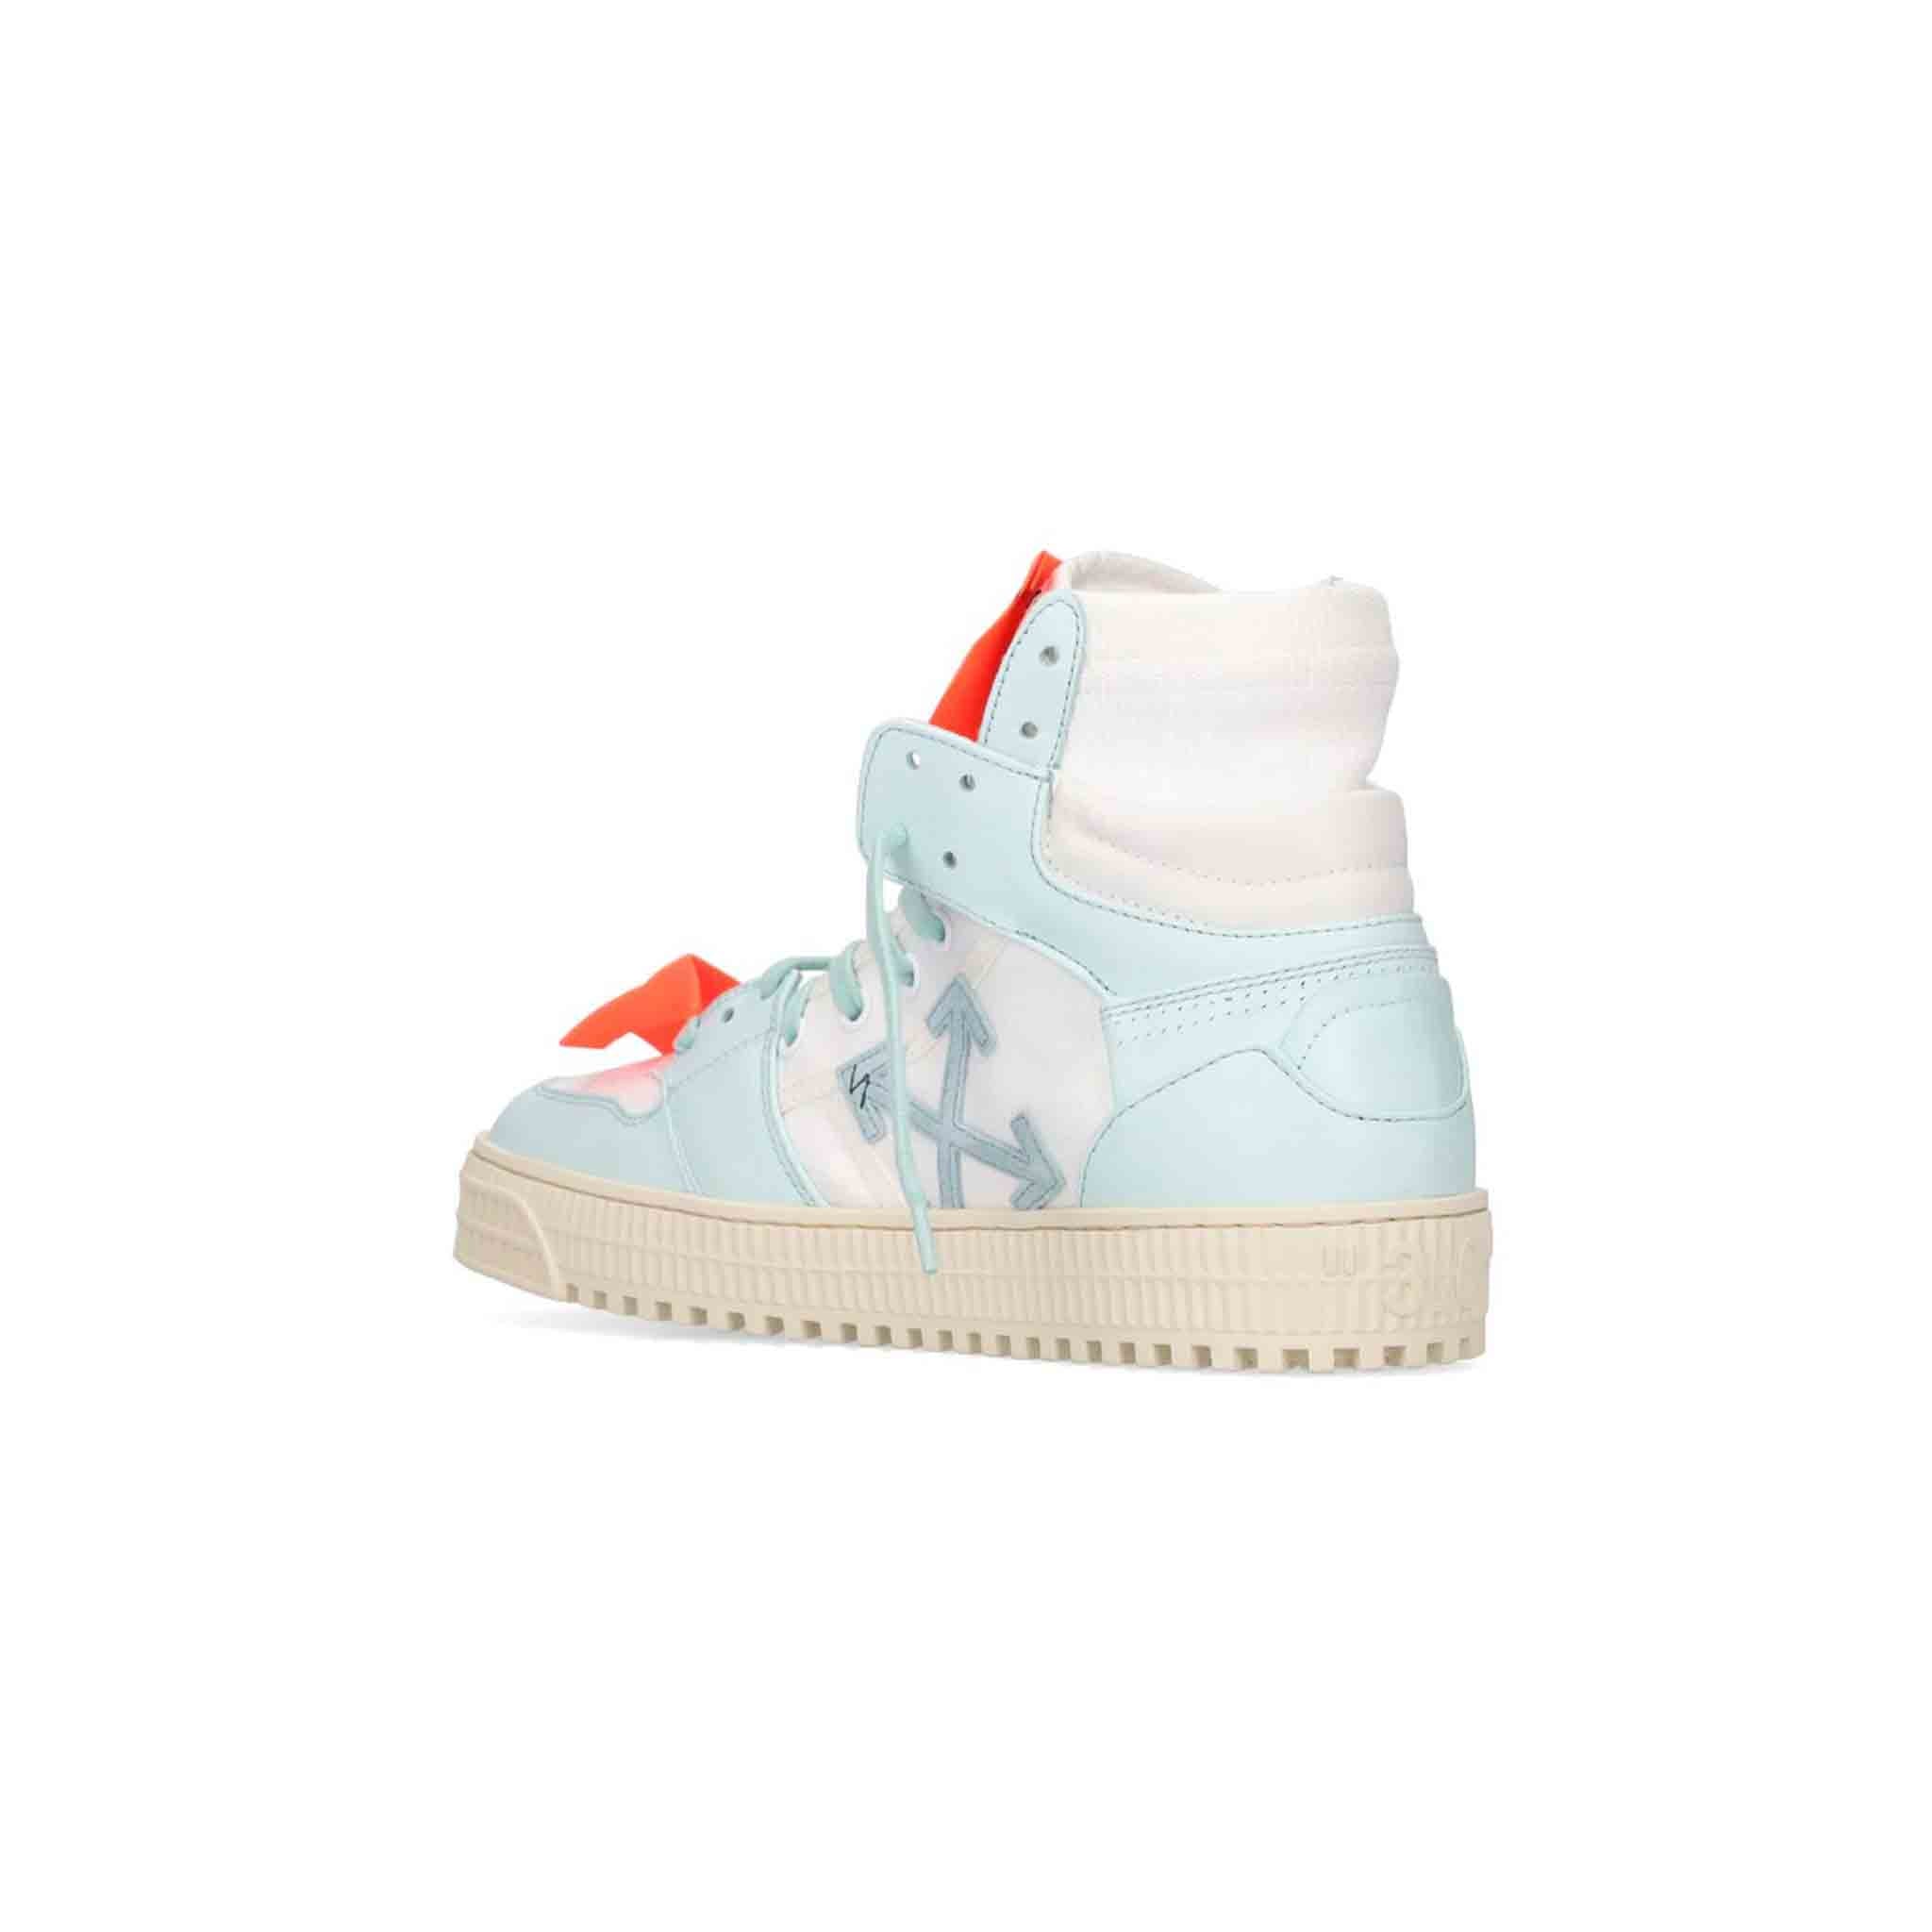 OFF-WHITE Womens 3.0 Court Leather in White and Light Blue